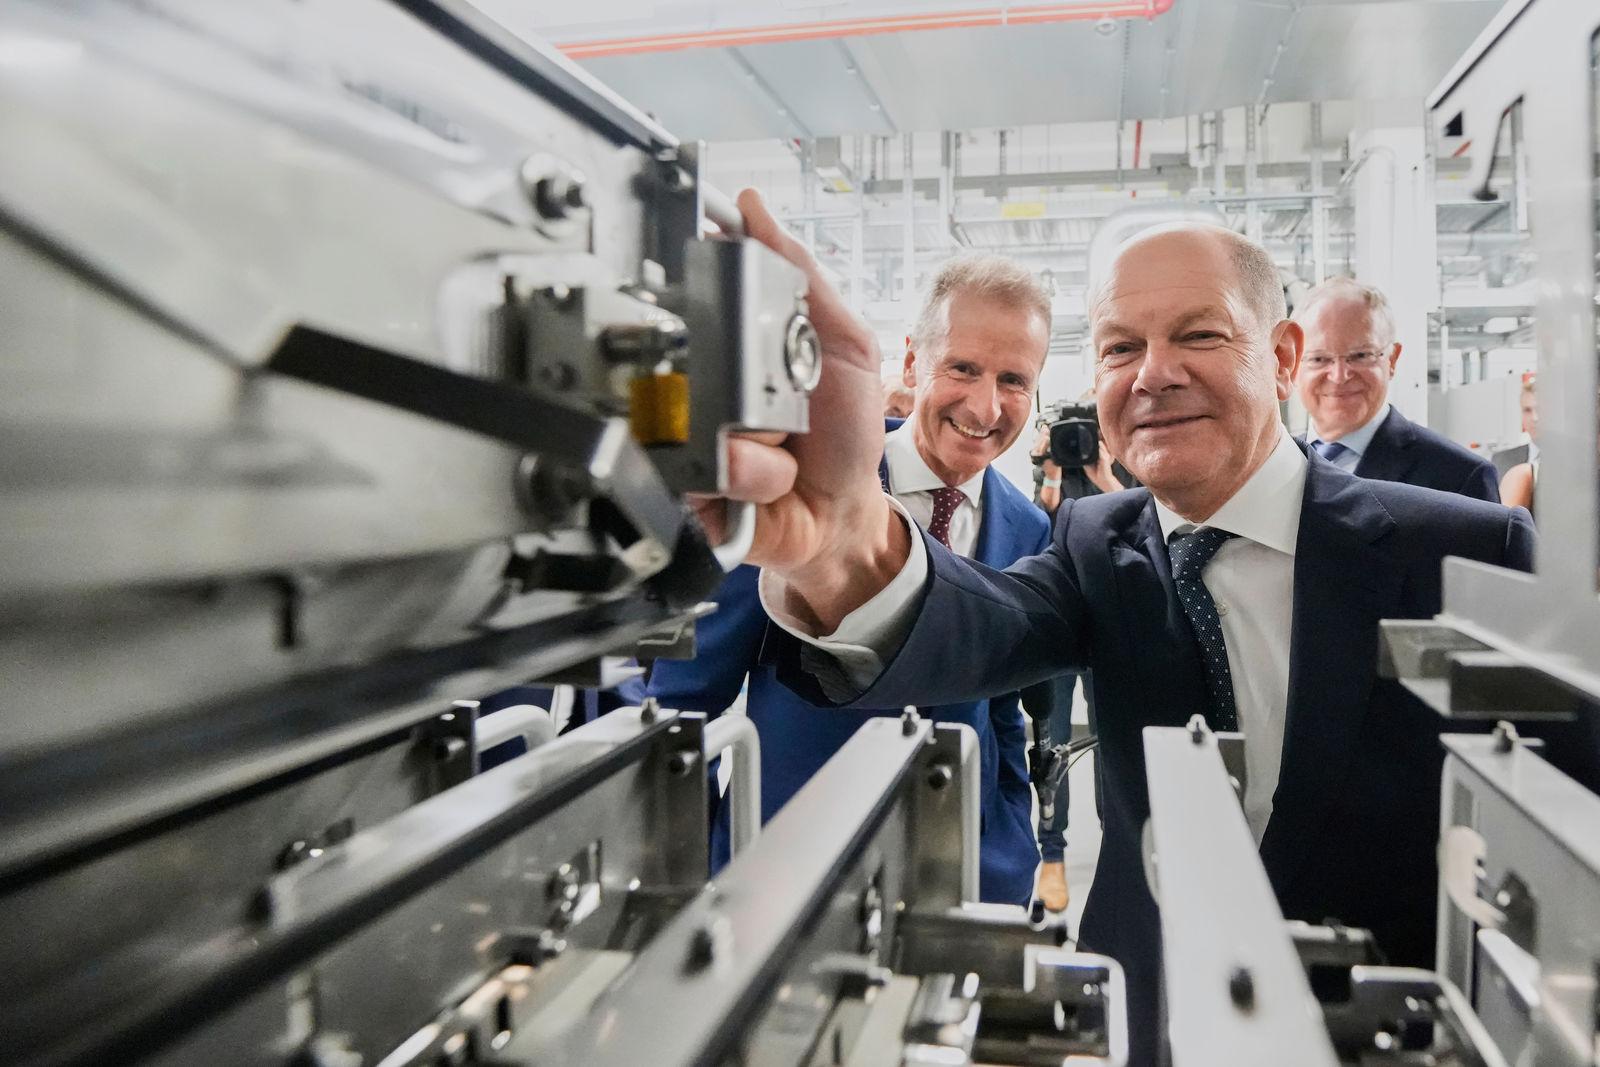 Ground breaking in Salzgitter: Volkswagen enters global battery business with “PowerCo”